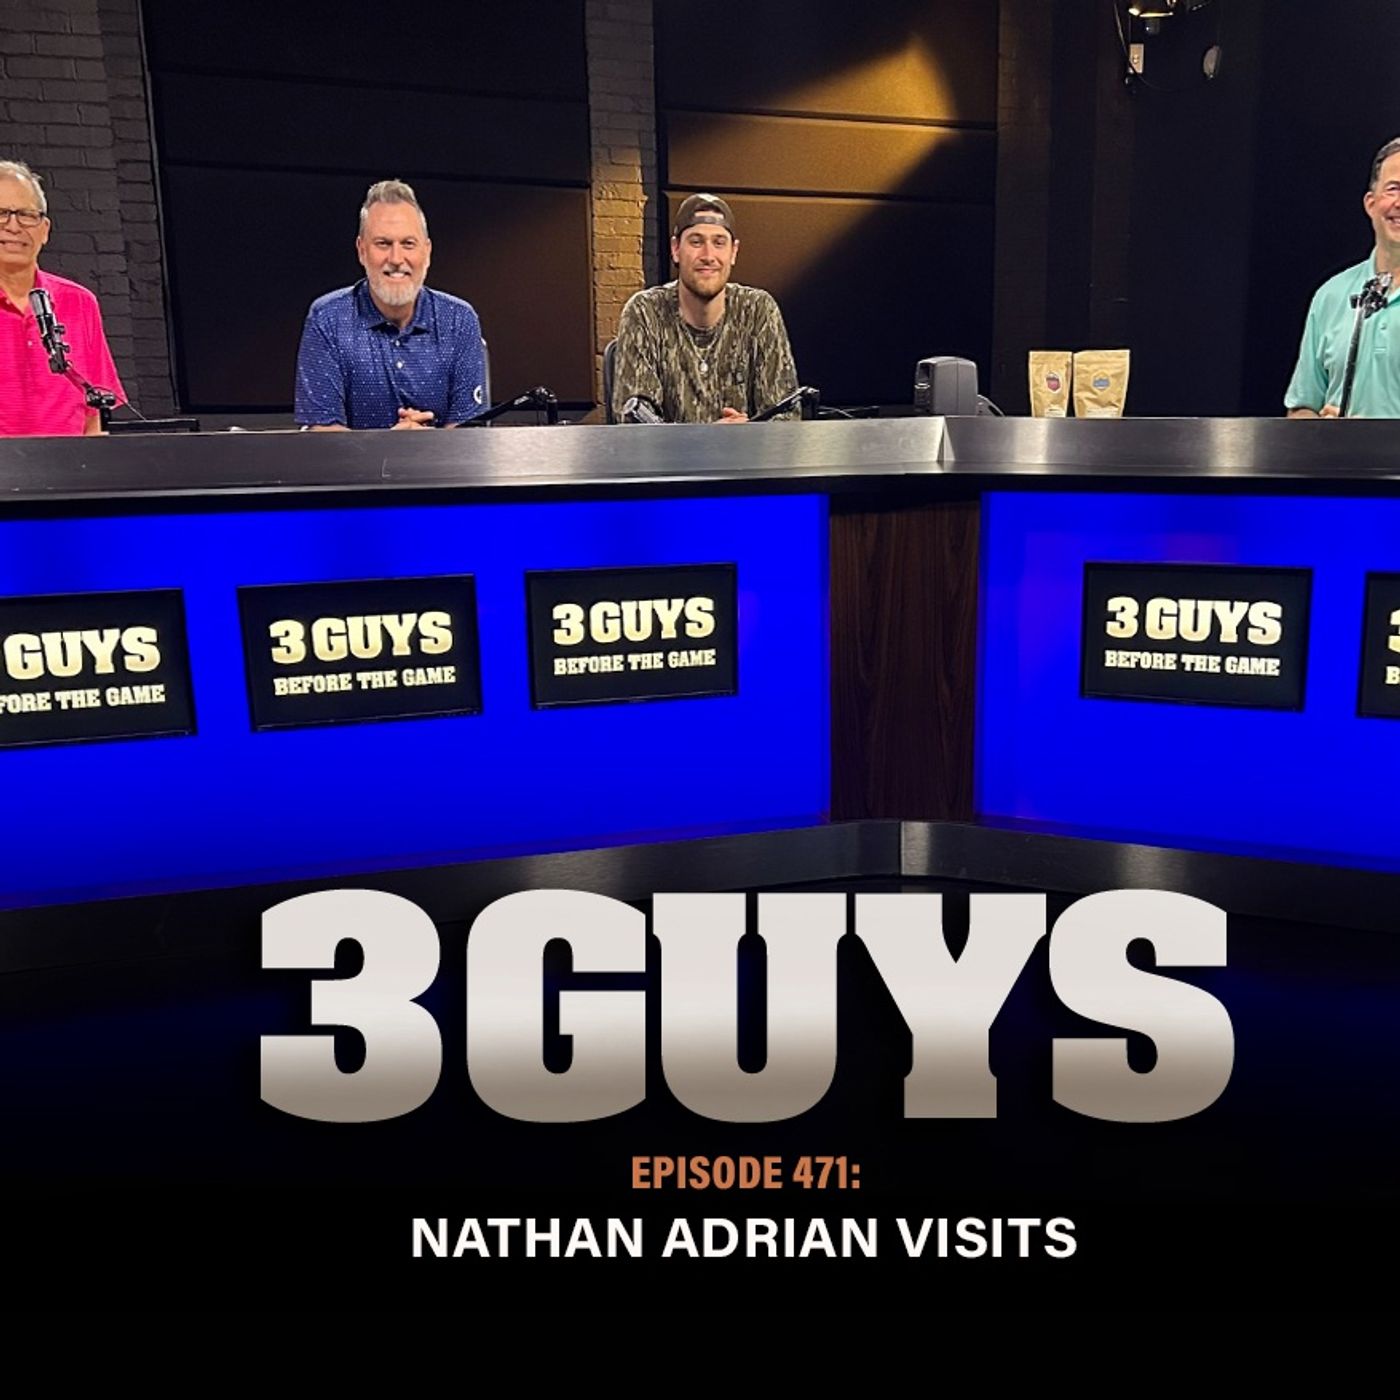 3 Guys Before The Game - Nathan Adrian Visits (Episode 471)